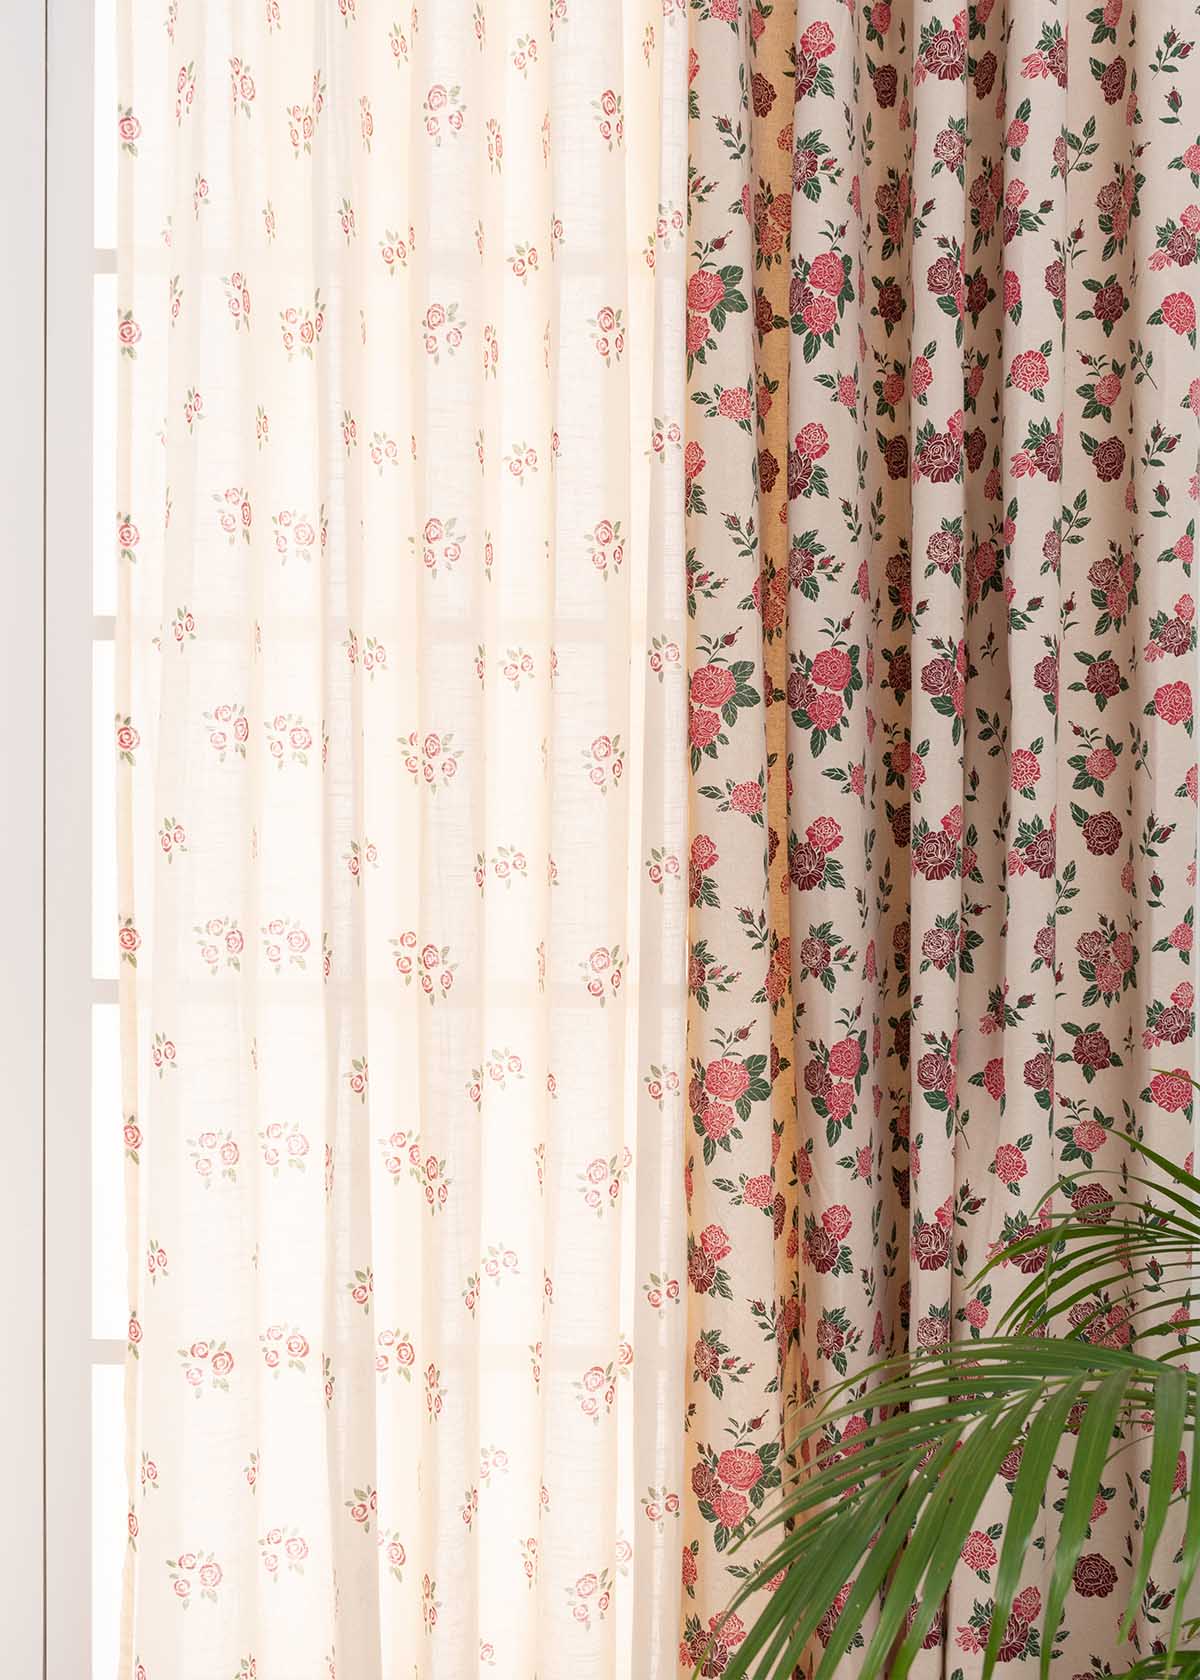 Wild Roses, Rose Garden Sheer Set Of 4 Combo Cotton Curtain - Wine Red